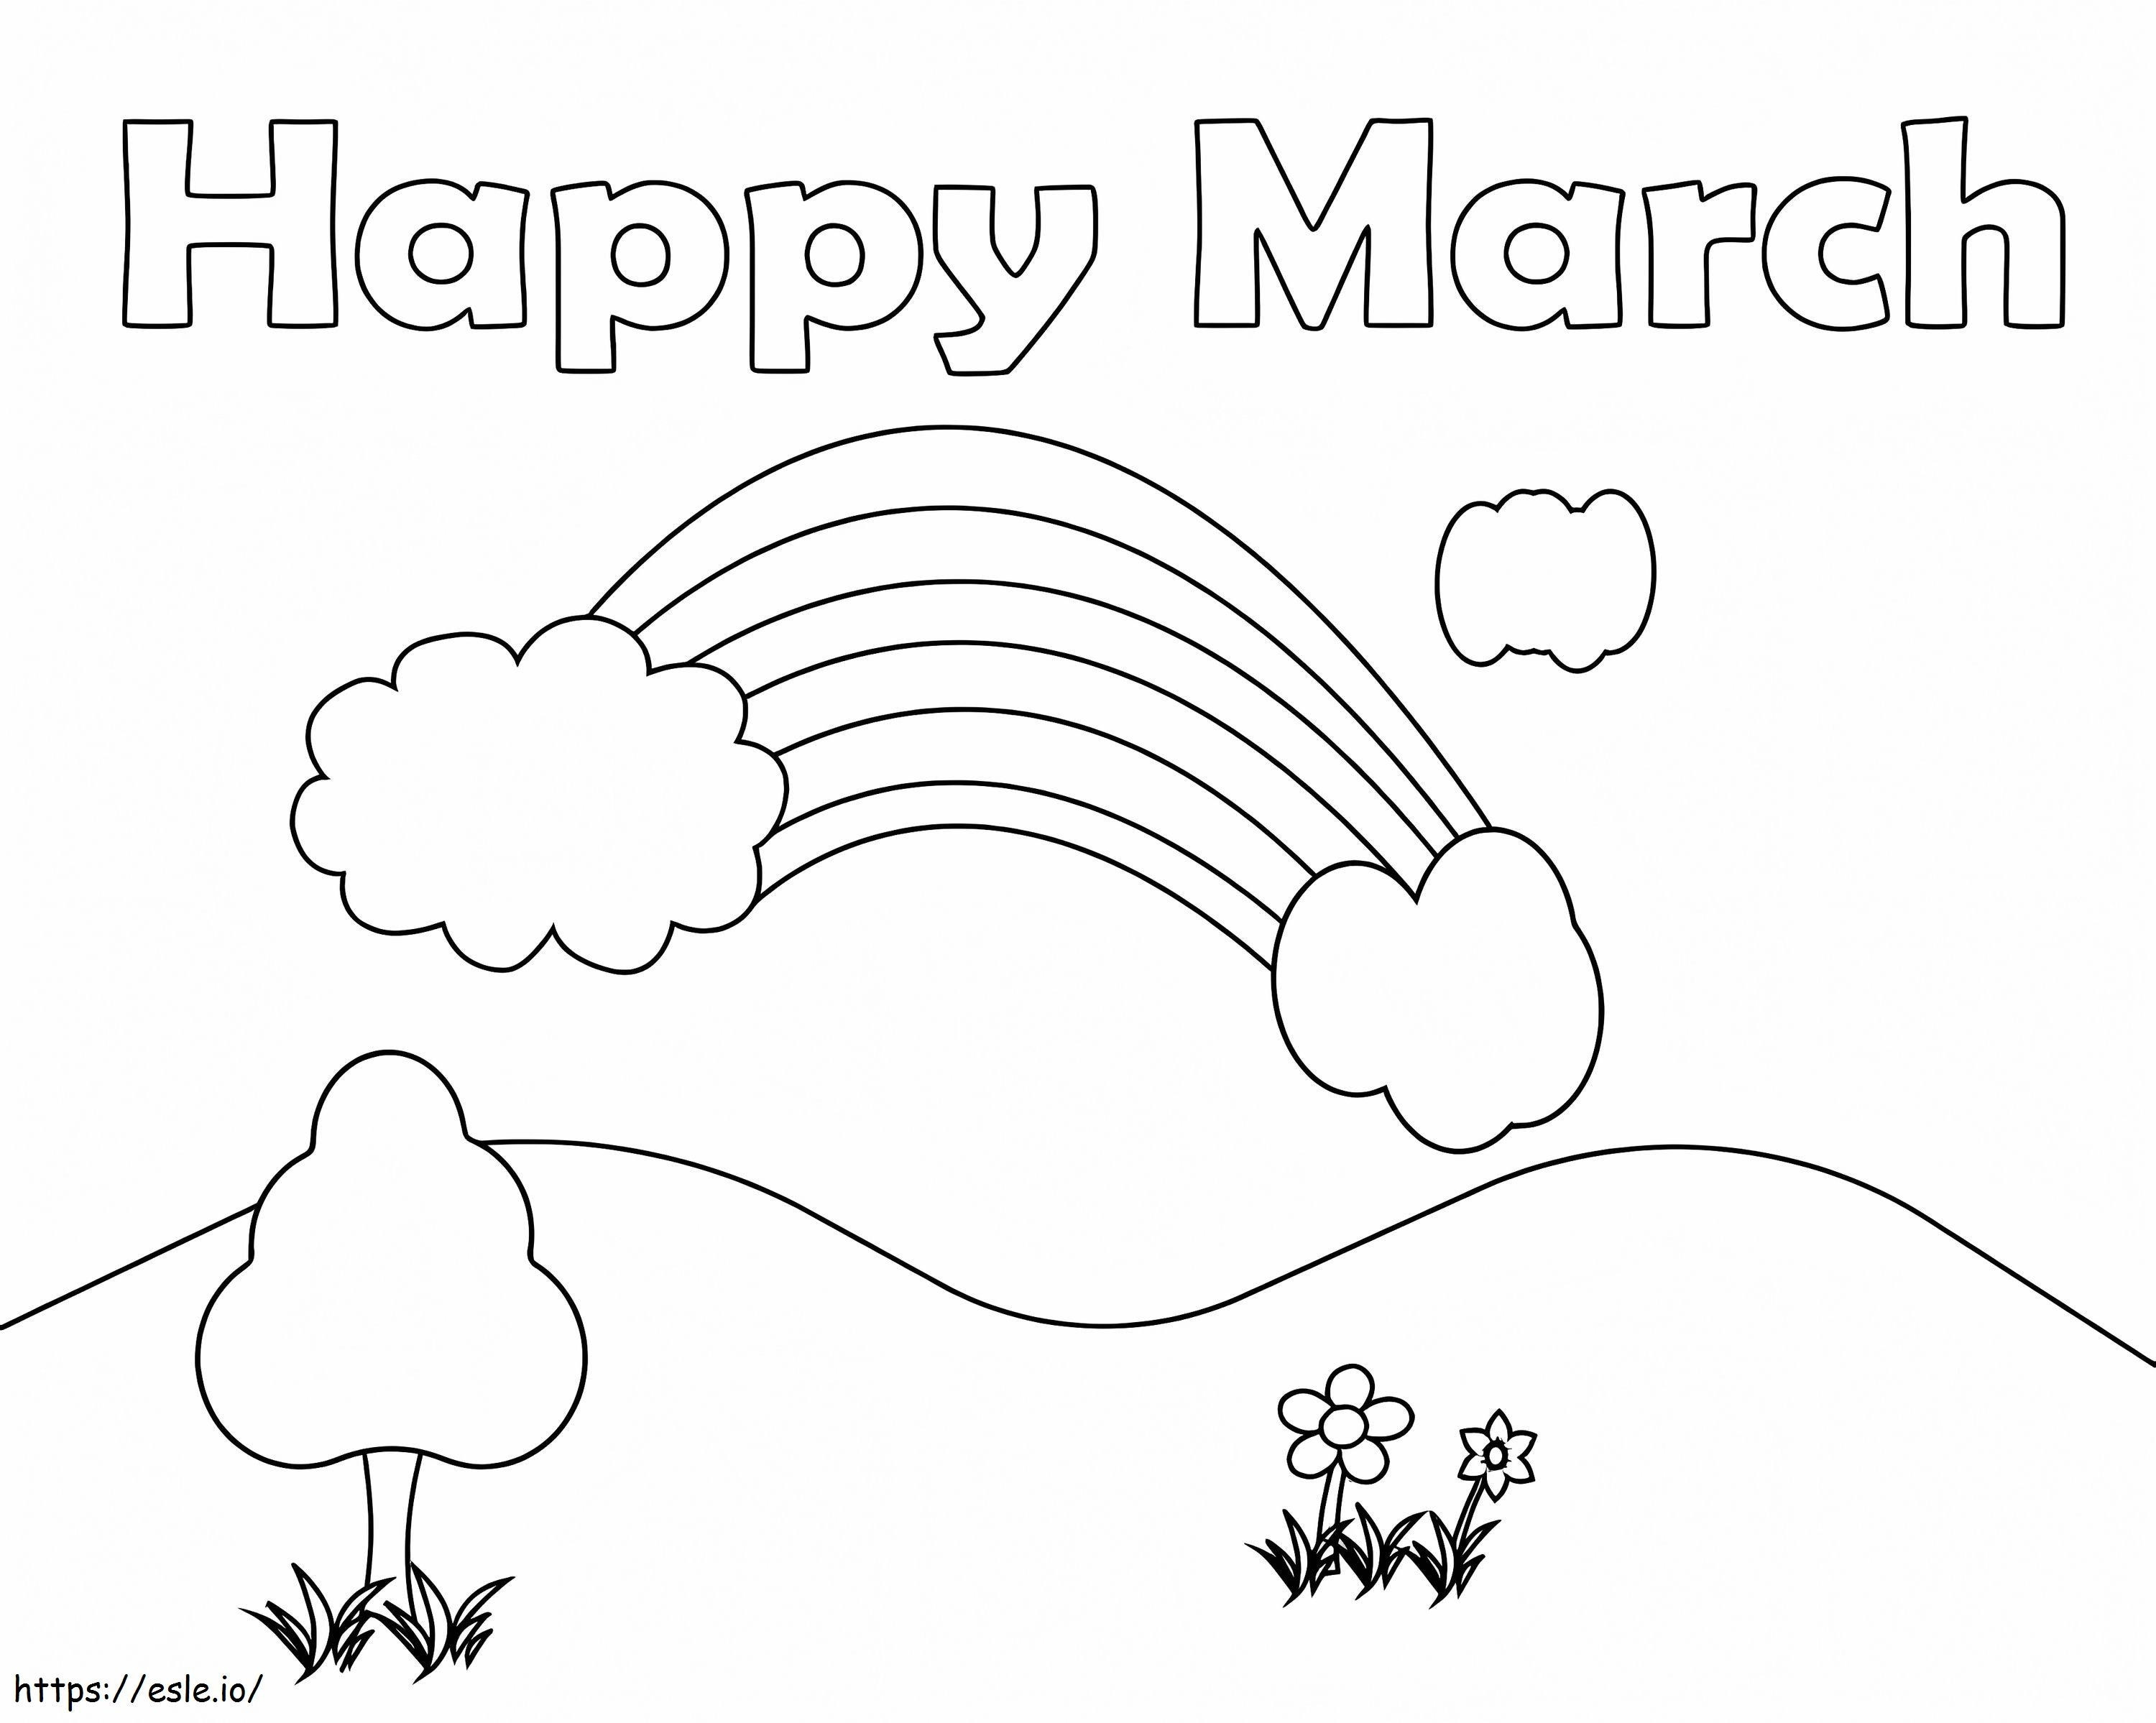 Happy March 2Nd coloring page